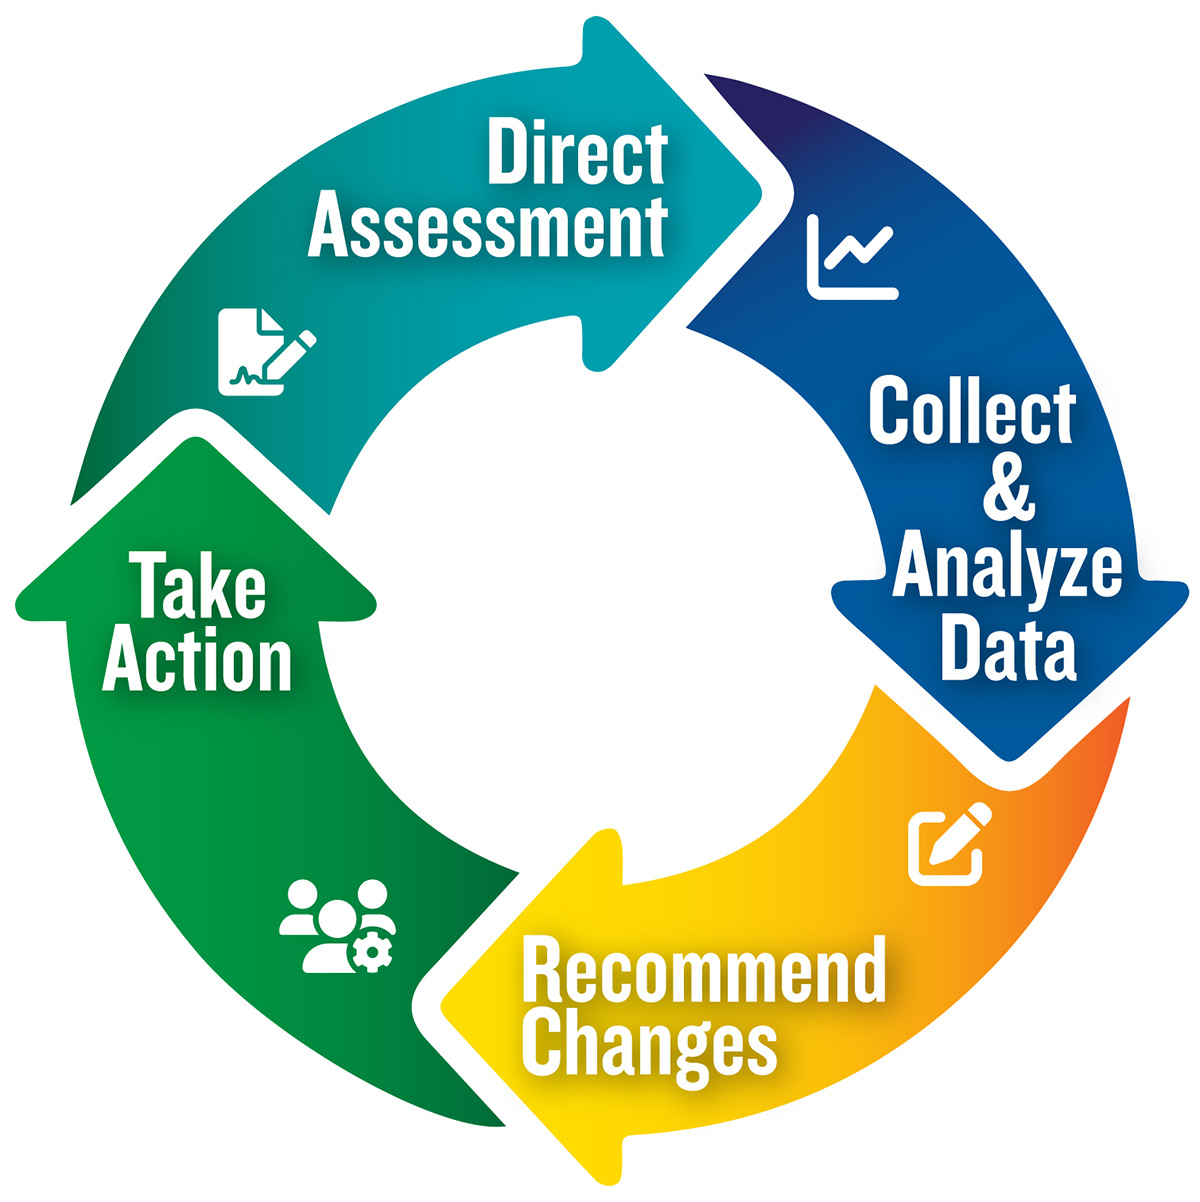 Four steps assessment cycle- Direct assessment - Collect & Analyze Data - Recommended Changes - Take Action